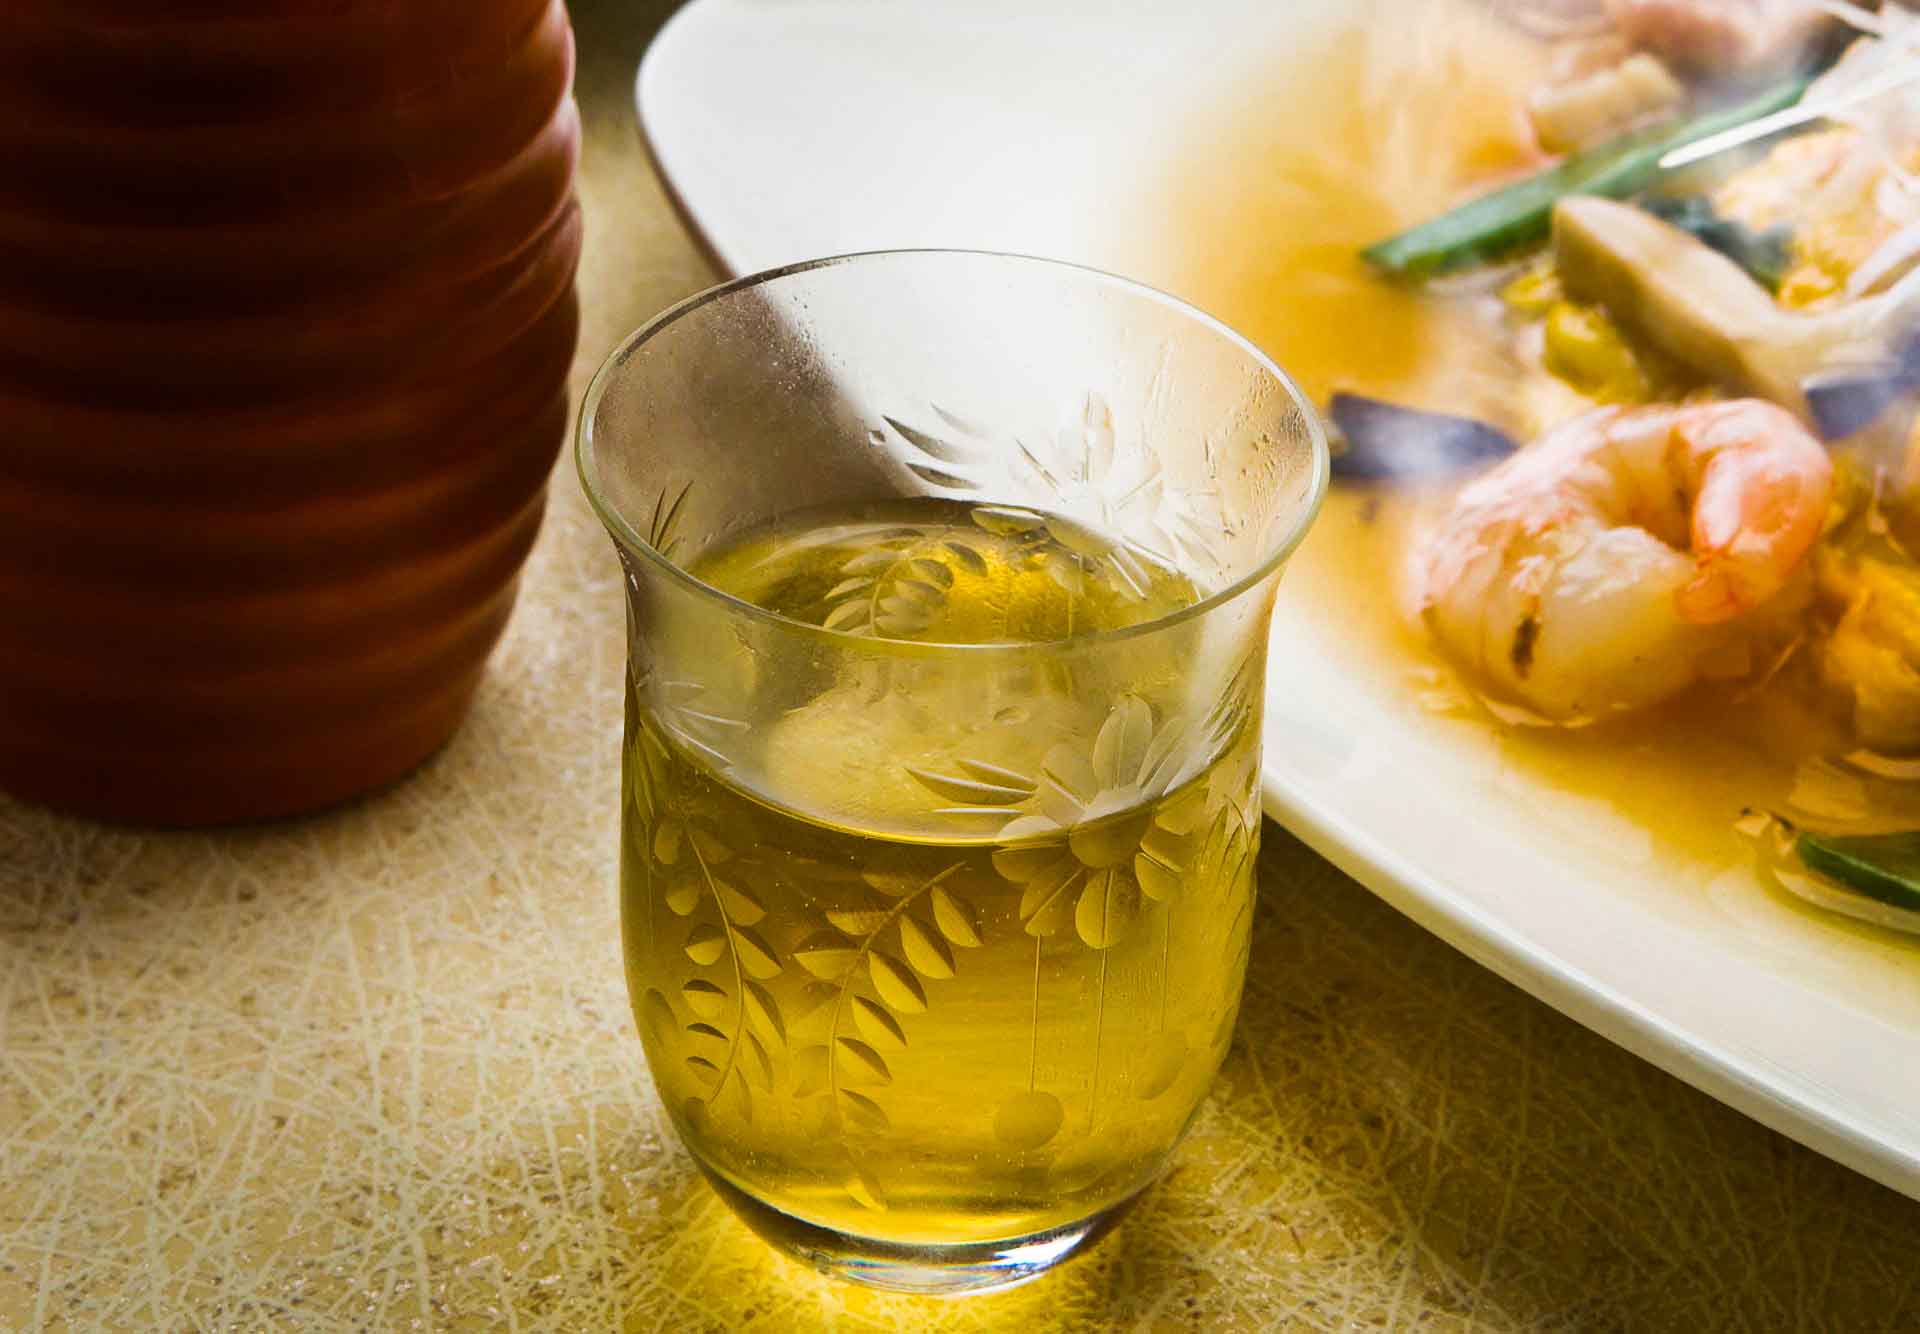 Shaoxing Wine for Authentic Chinese Cooking